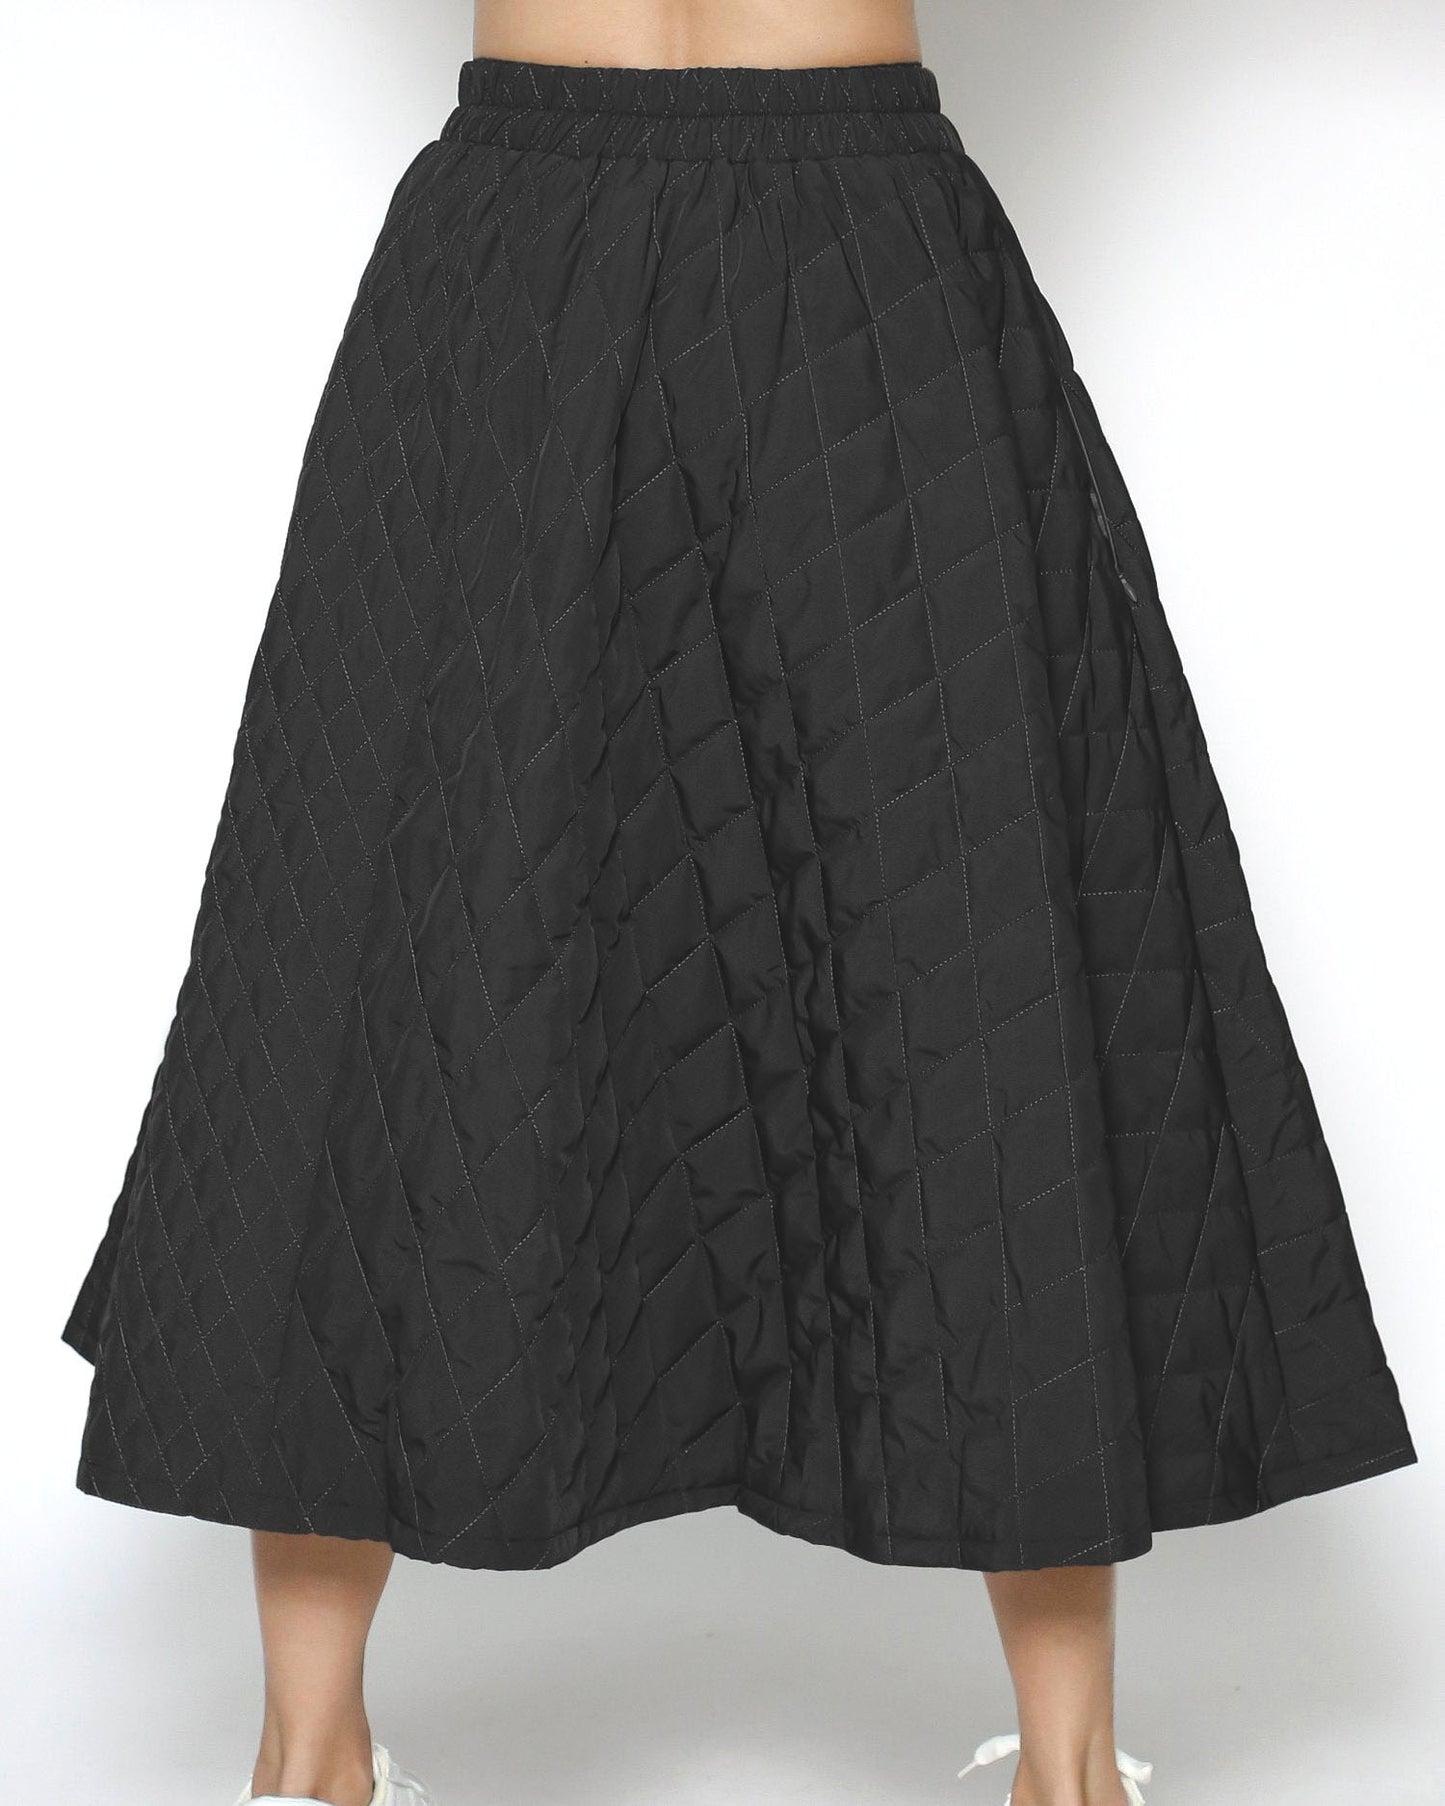 black quilted flare skirt *pre-order*